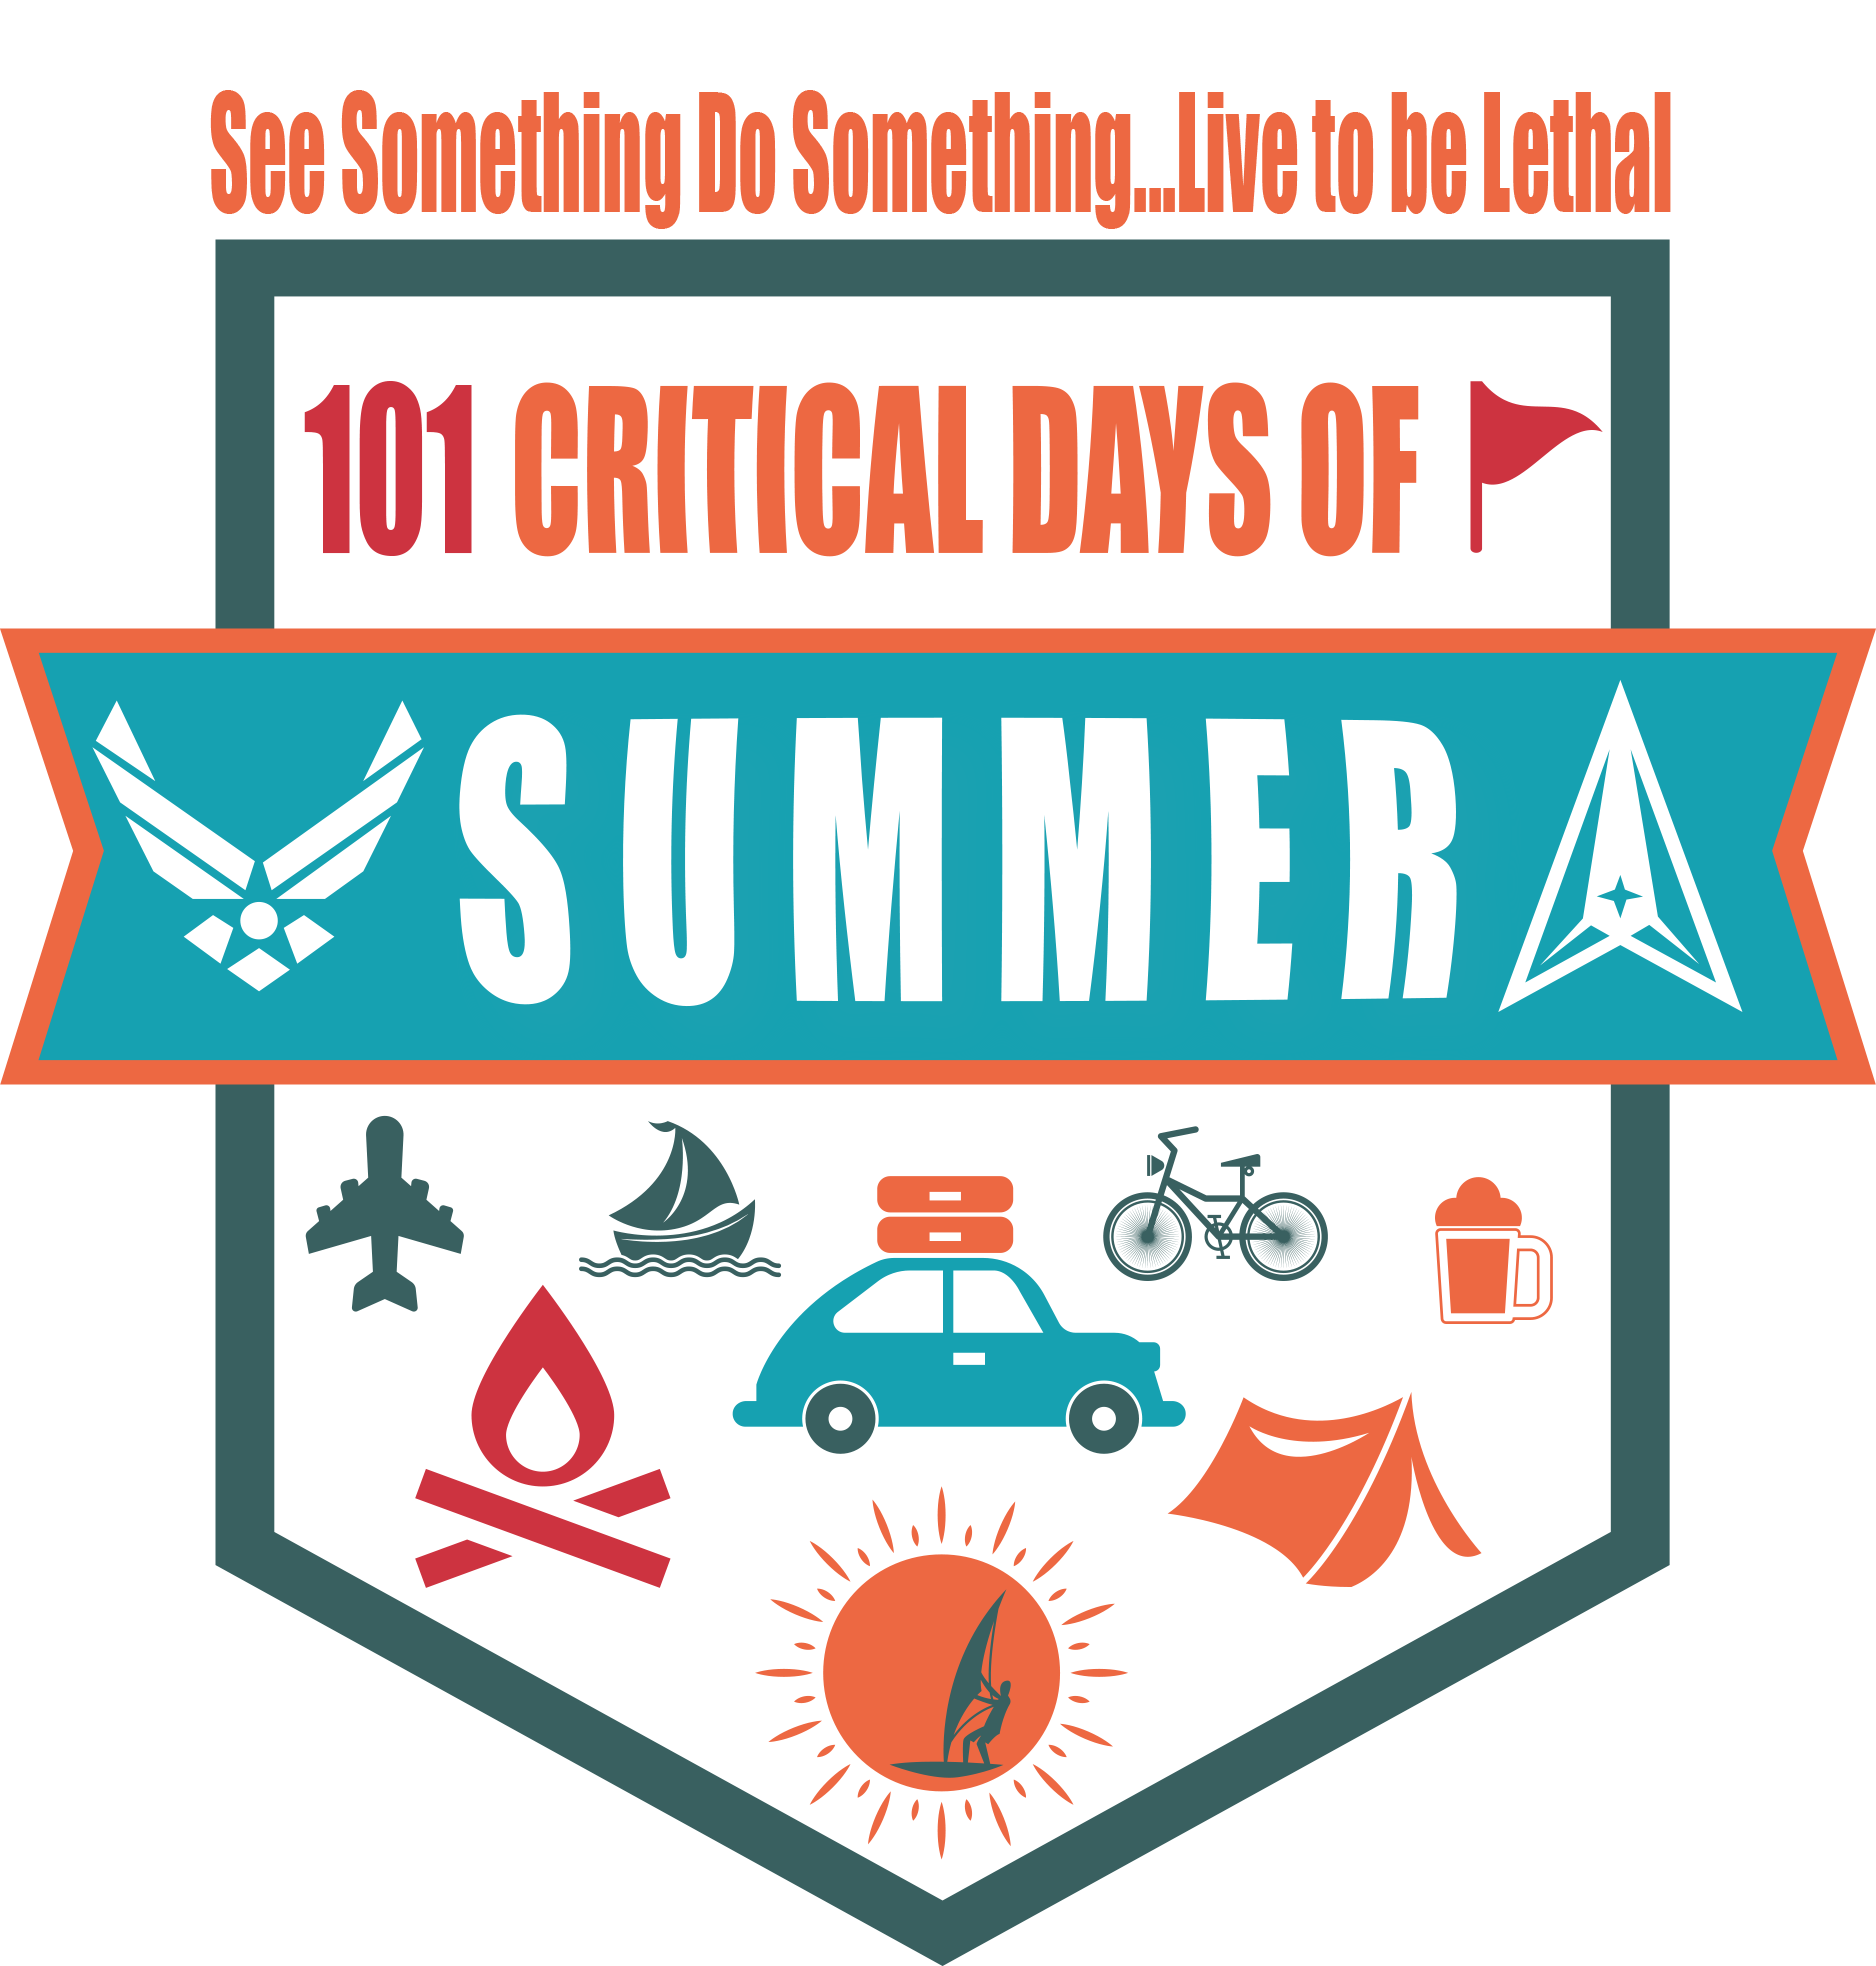 101 Critical Days of Summer Safety